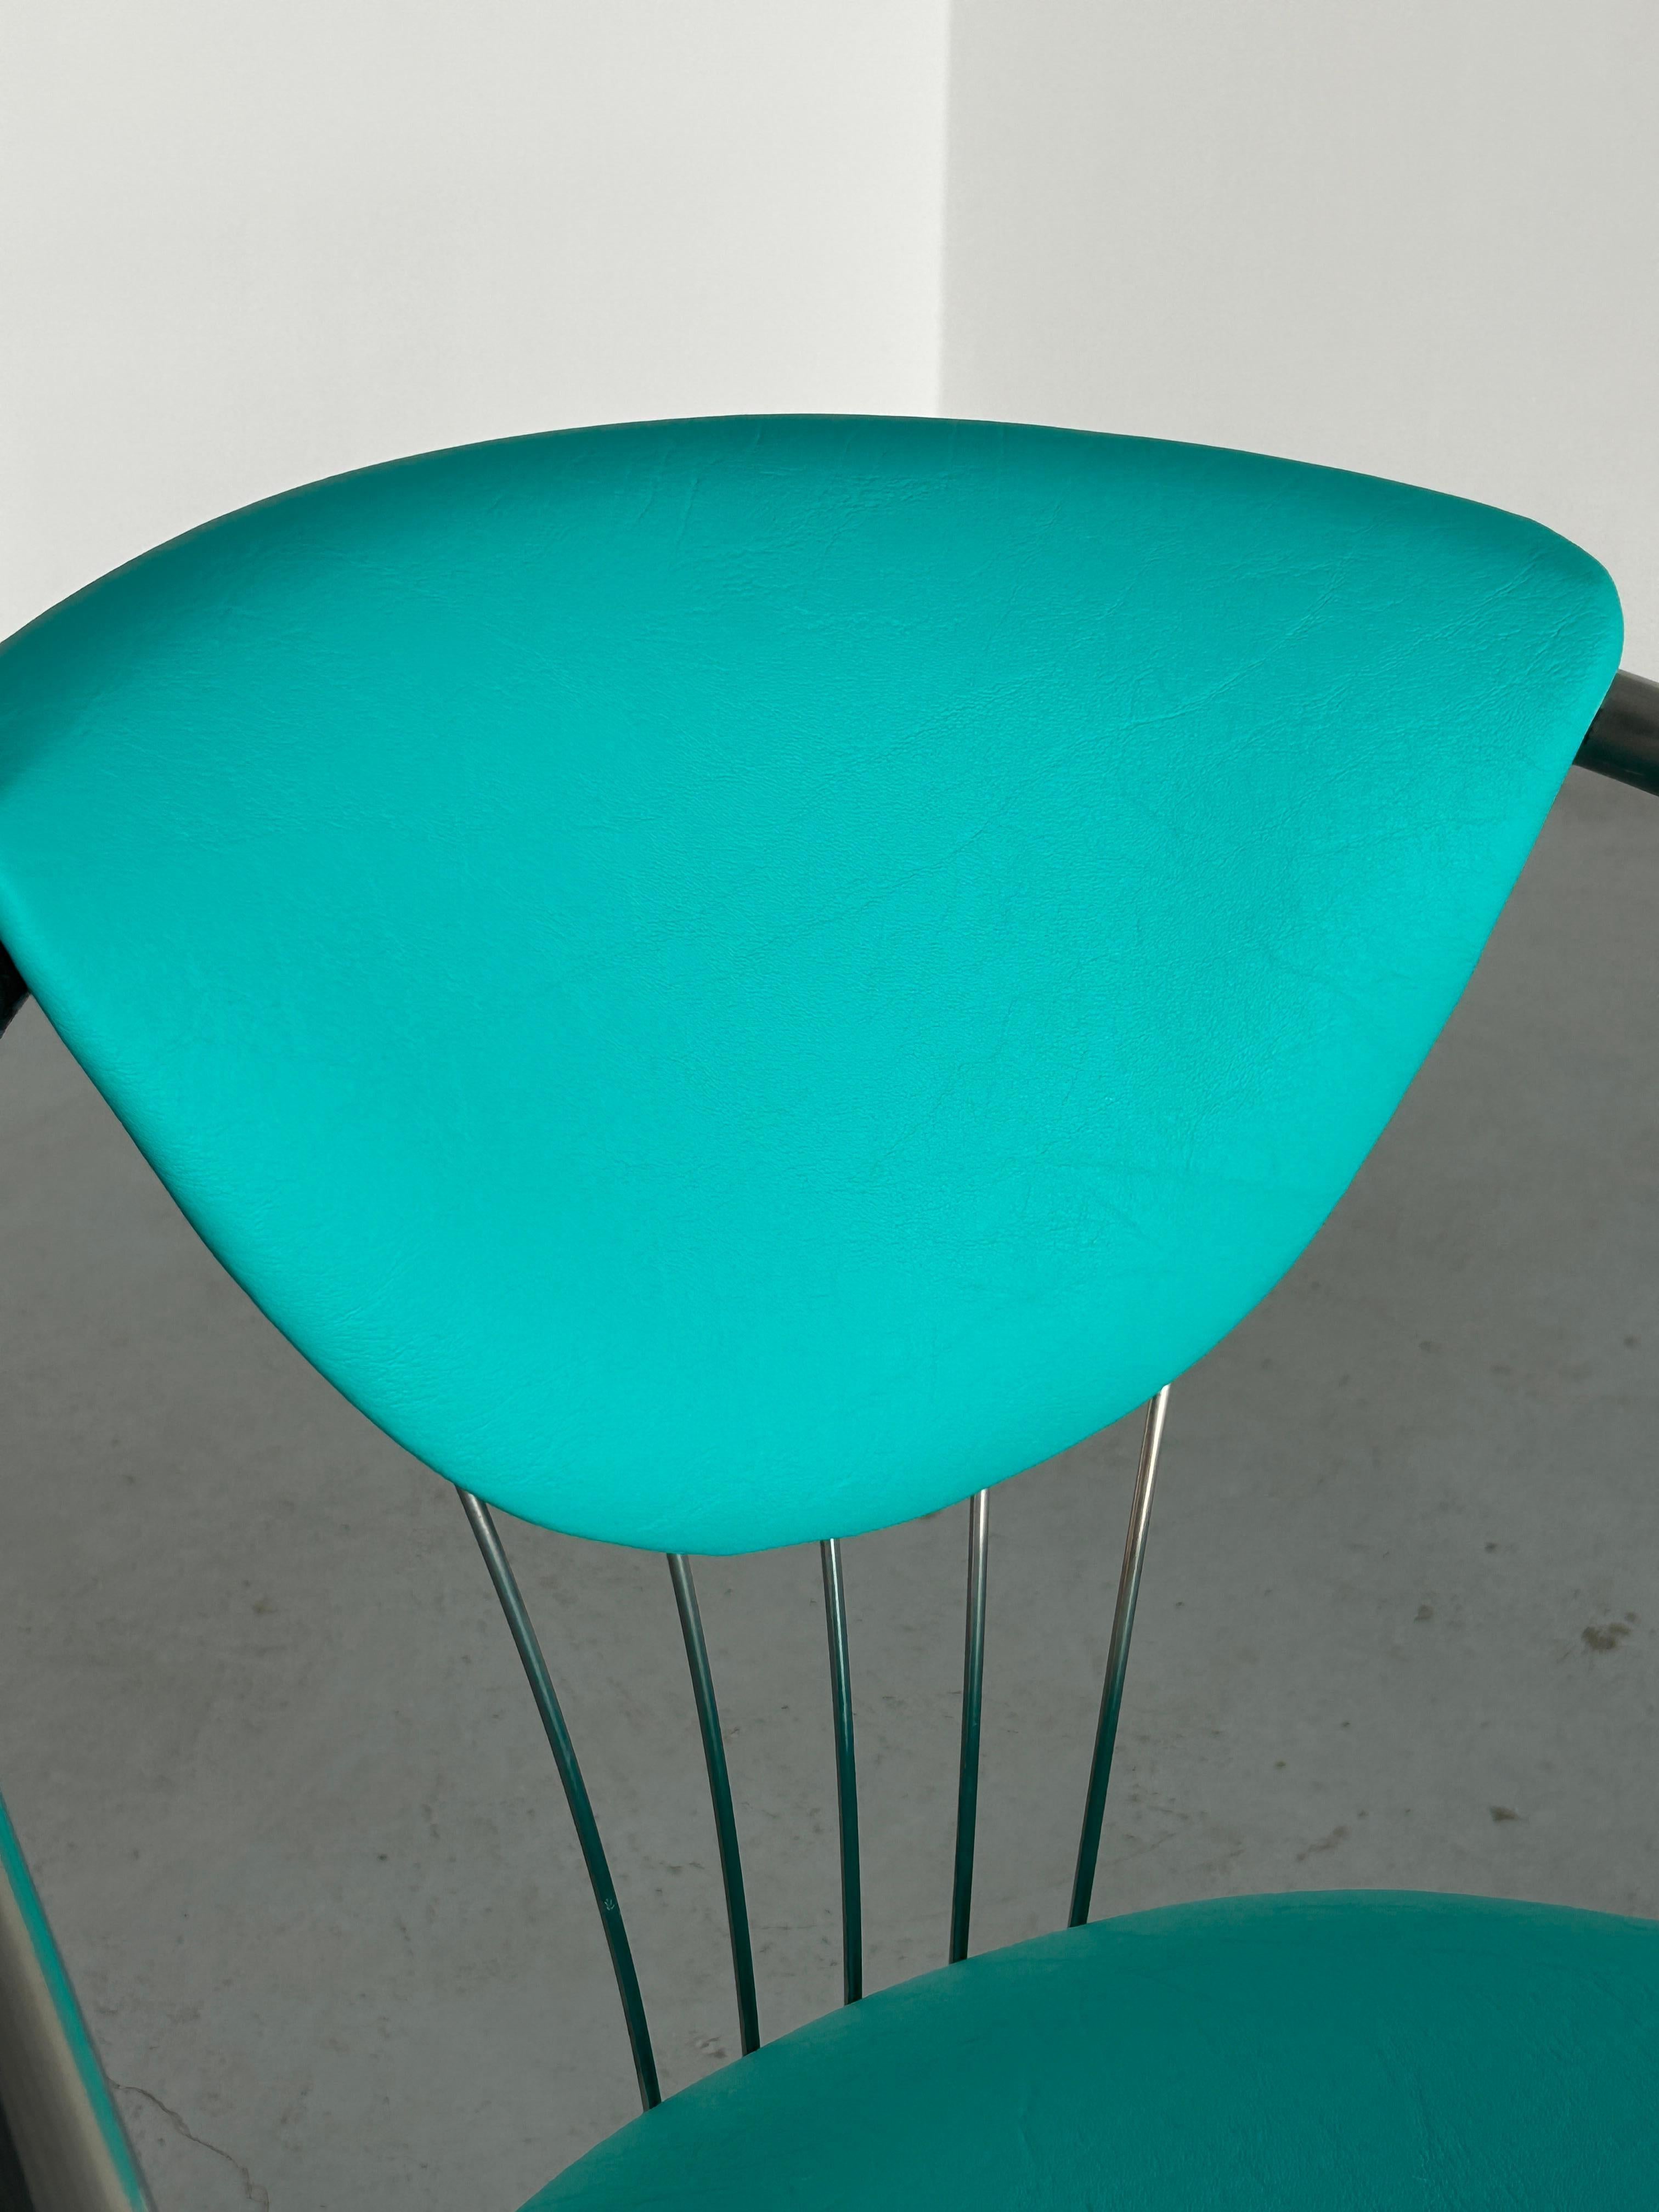 1 of 2 Vintage Steel and Mint Green Faux Leather Dining Chairs by Effezeta, 90s For Sale 3